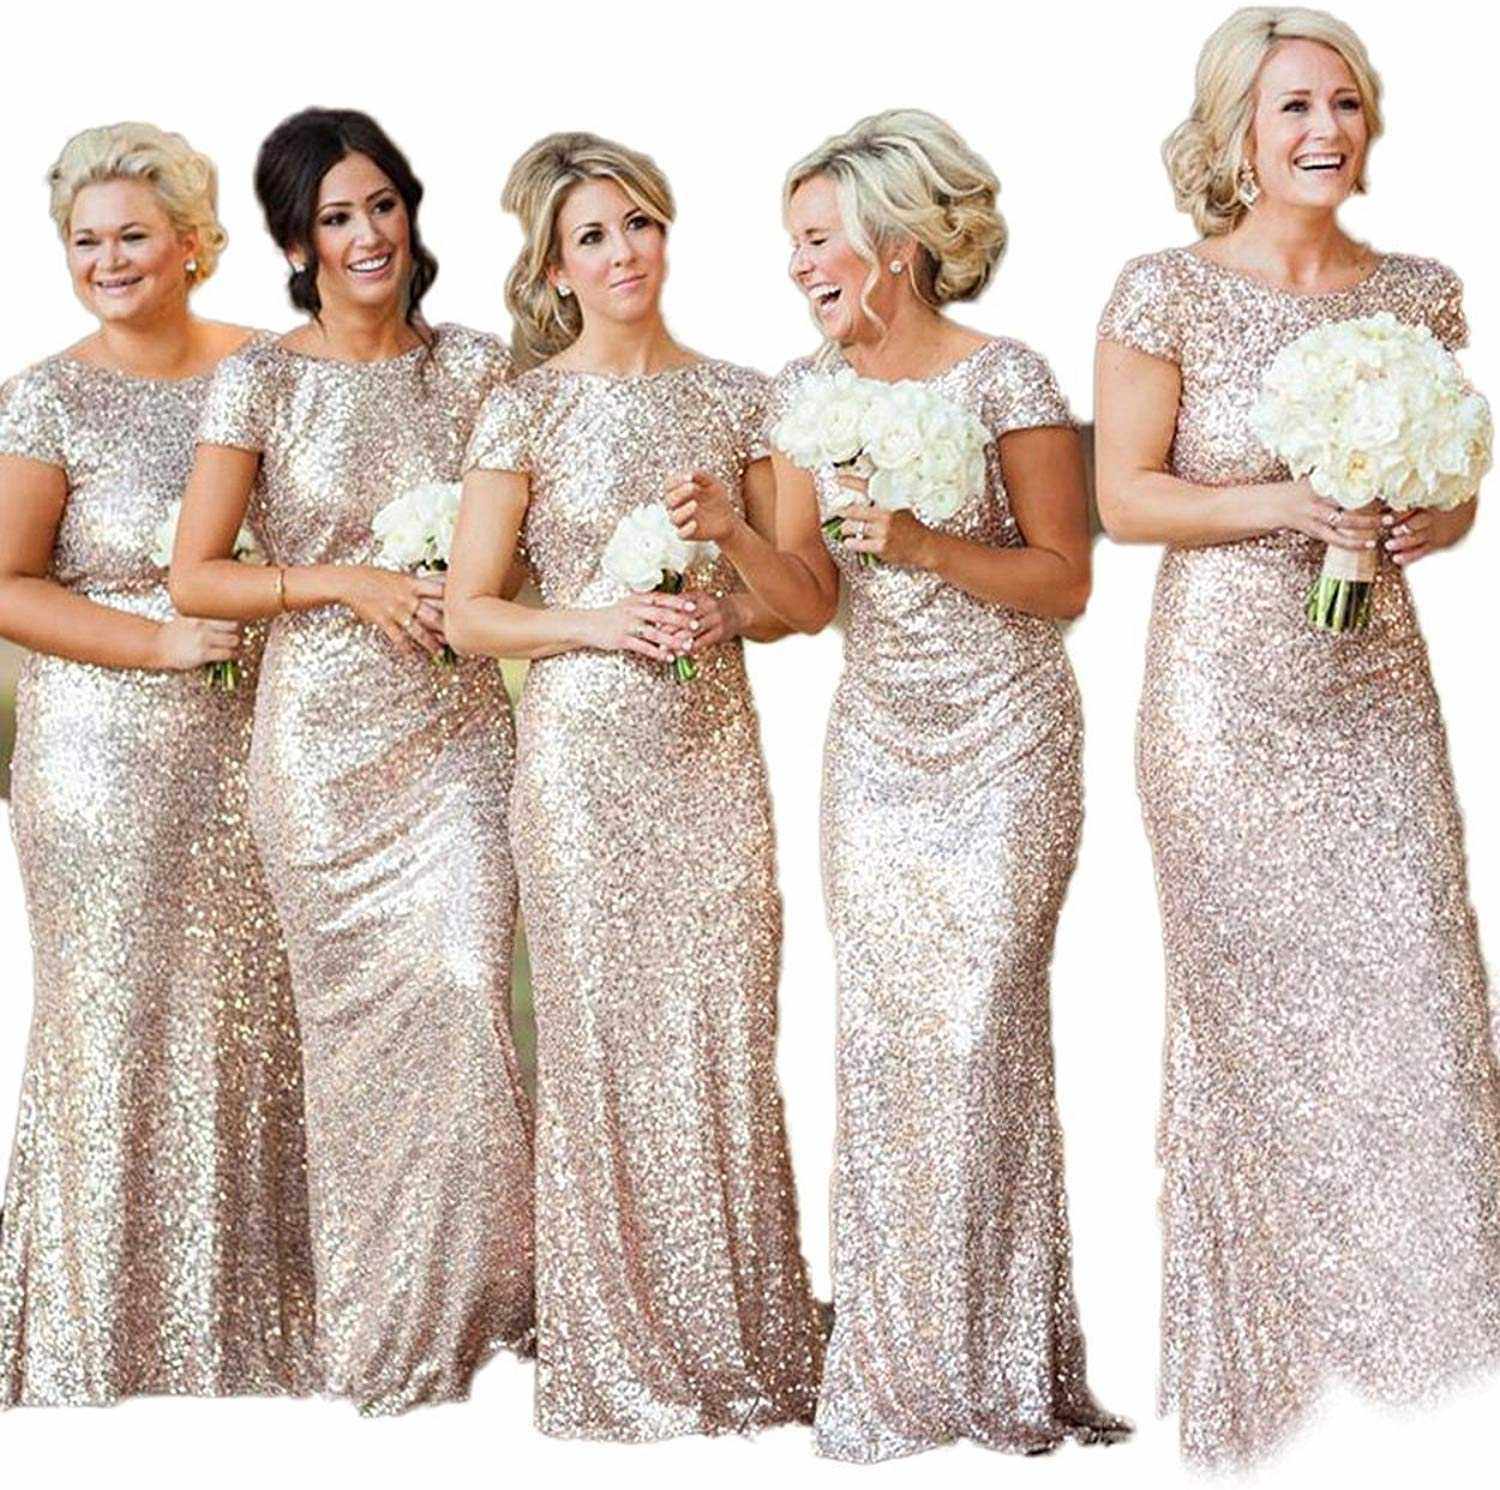 Sequins Prom Long Rose Gold Bridesmaid DressesWomen's Sequins Prom Long Rose Gold  Bridesmaid Dresses